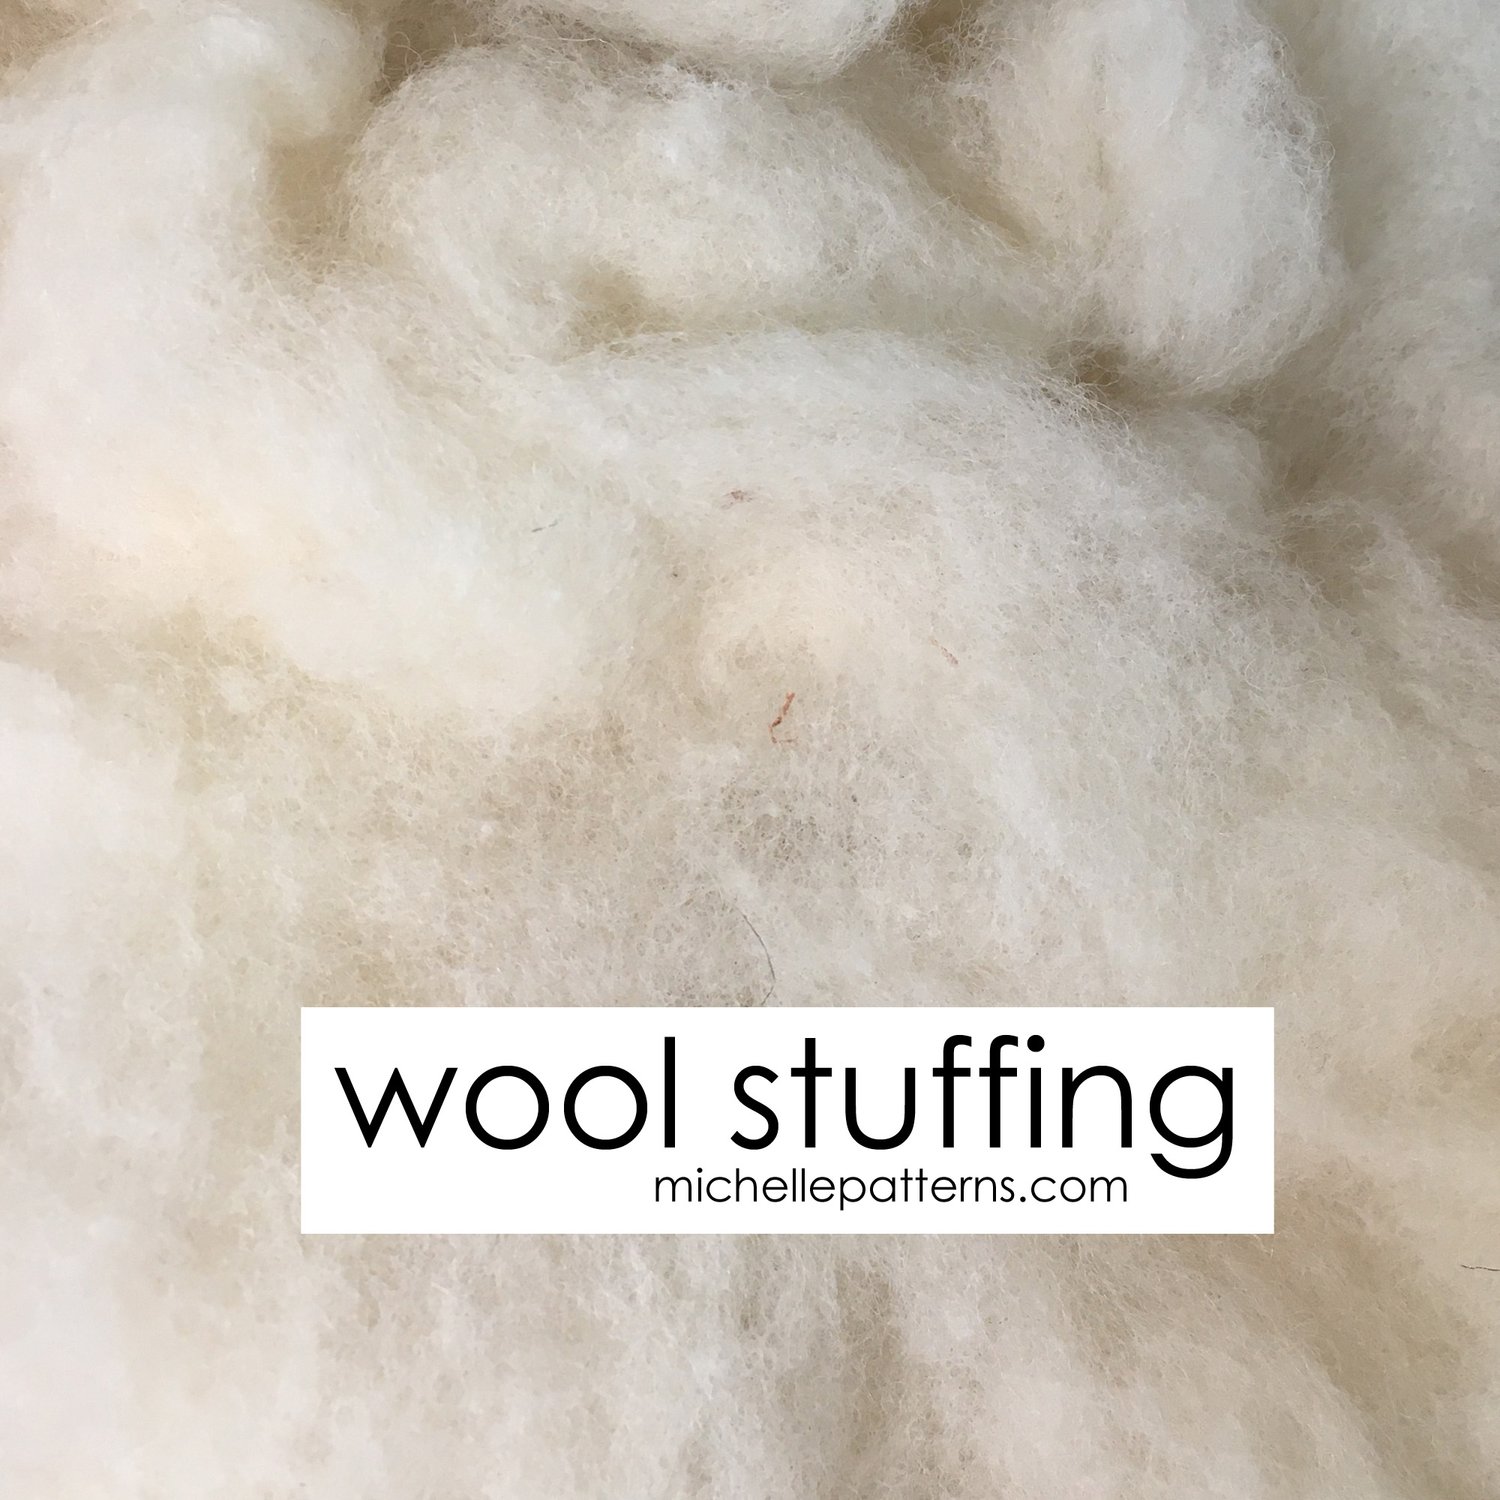 iMongol- Carded Lambs Wool Stuffing Batting for Needle Felting, Knitted Toys, Crafts, Bright Creations, Pillow Filler, Stuffed Animals, Cushions